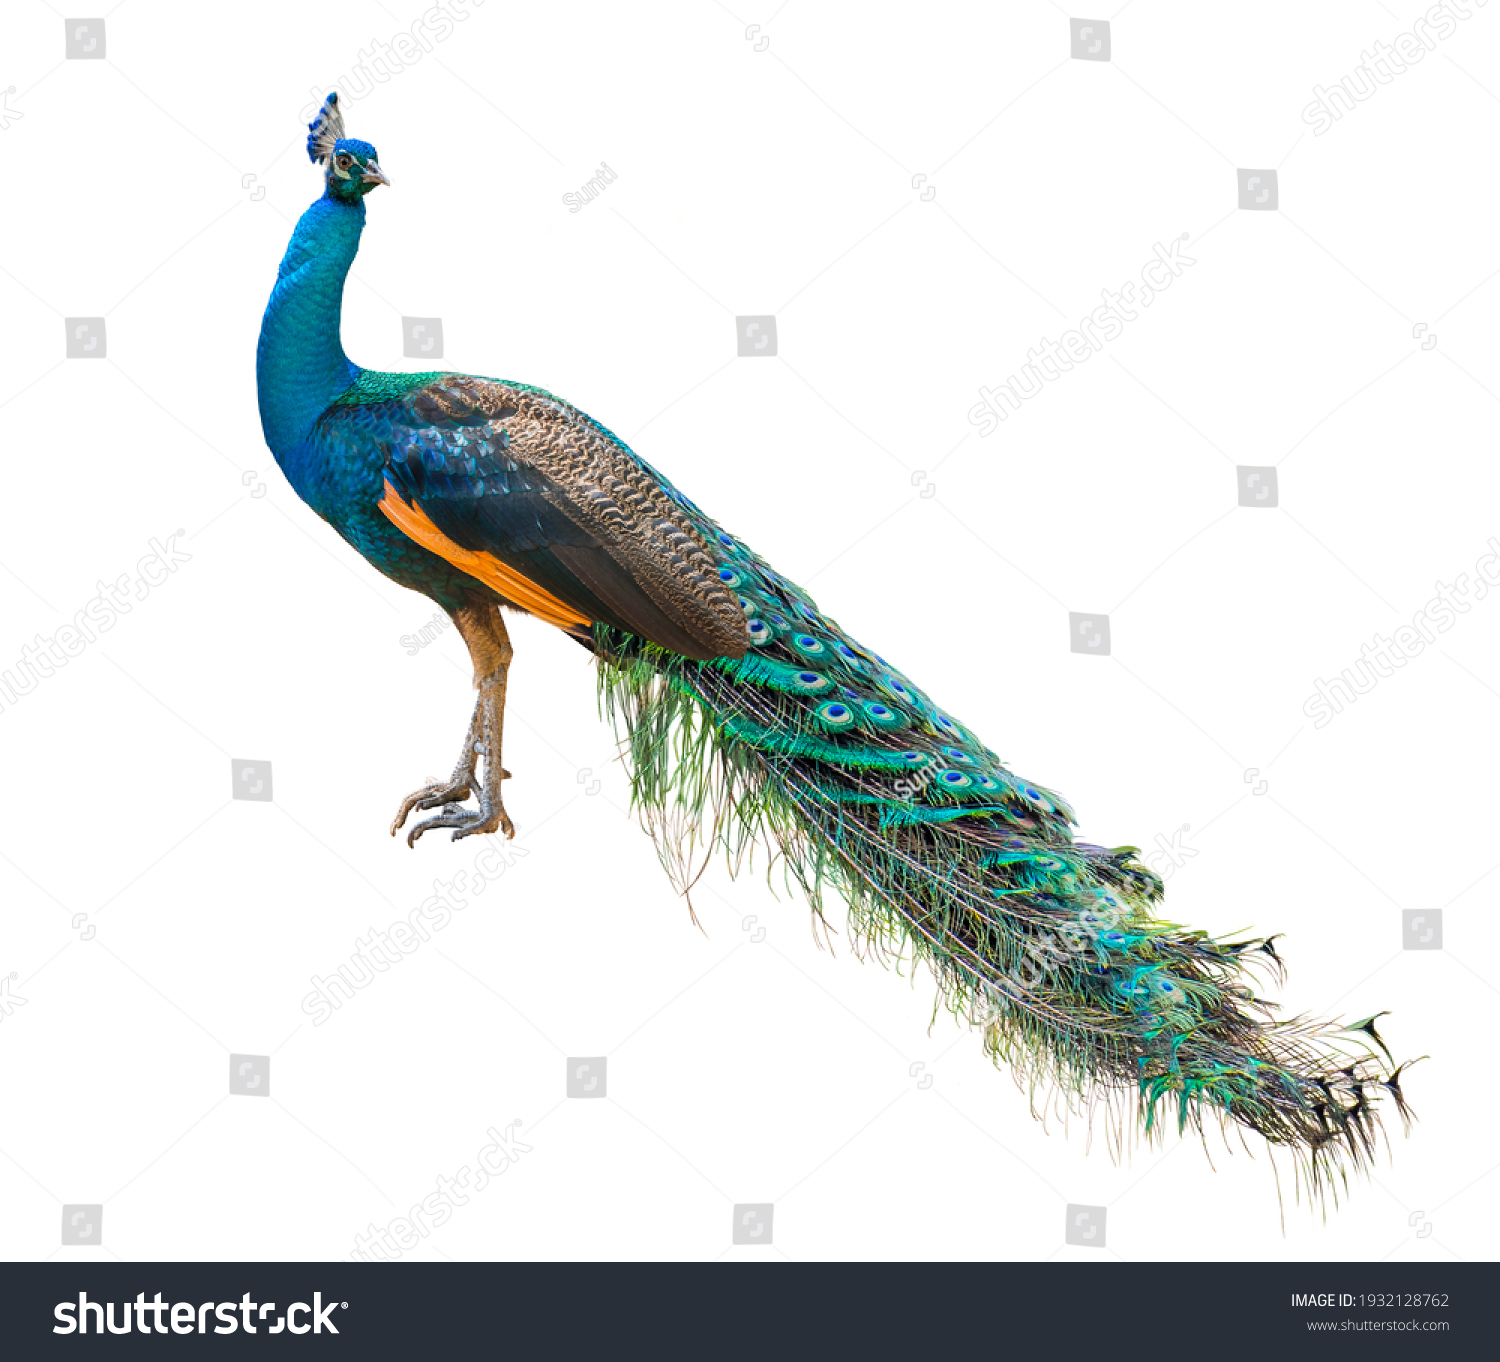 Indian peafowl, Blue peafowl on a white background. #1932128762